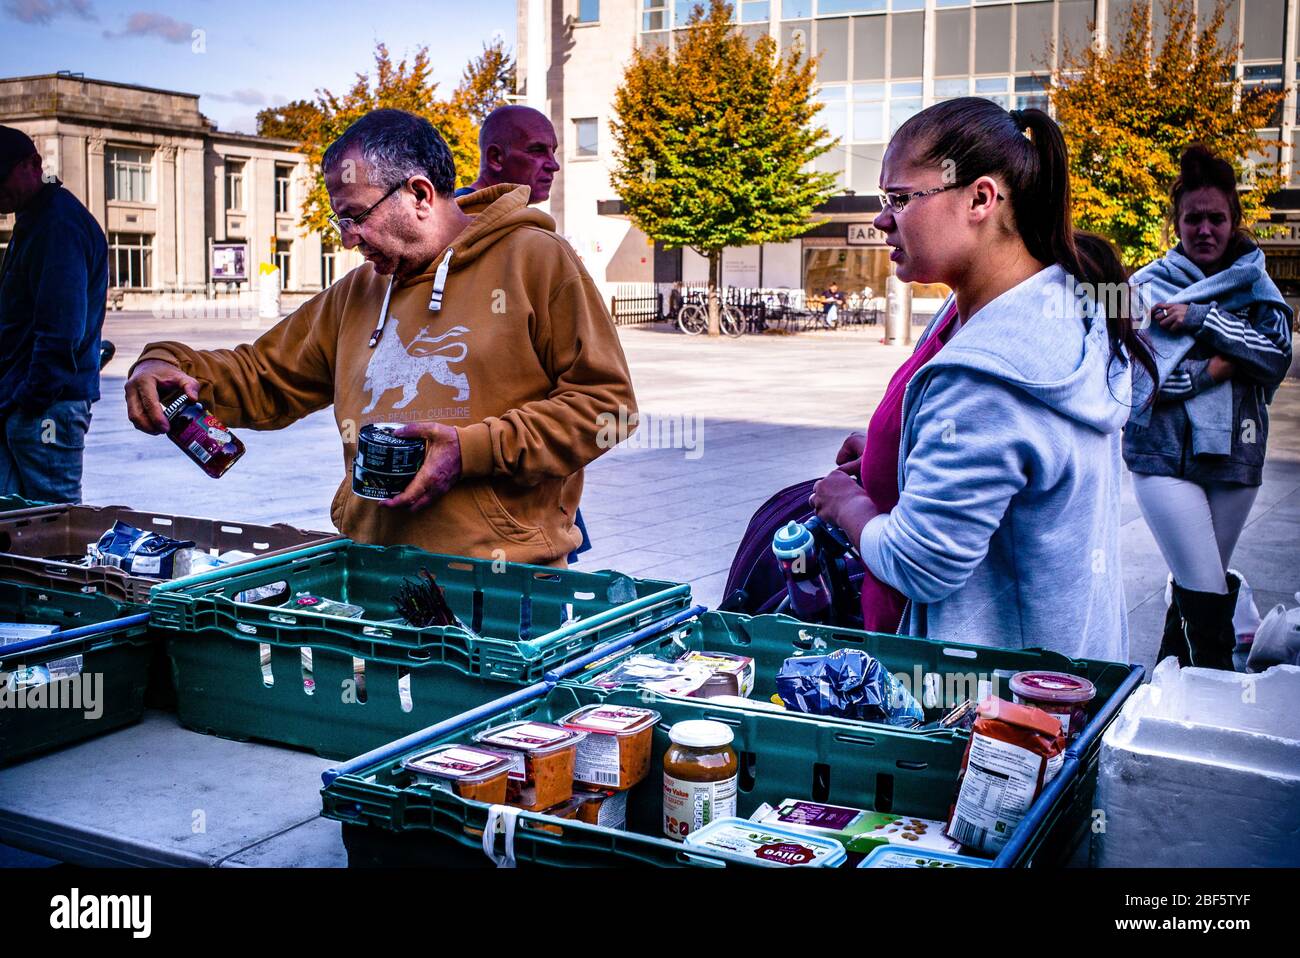 A young mother waits to look at the free food at a food bank organised by a local religious group in the port city of Southampton, England. Stock Photo